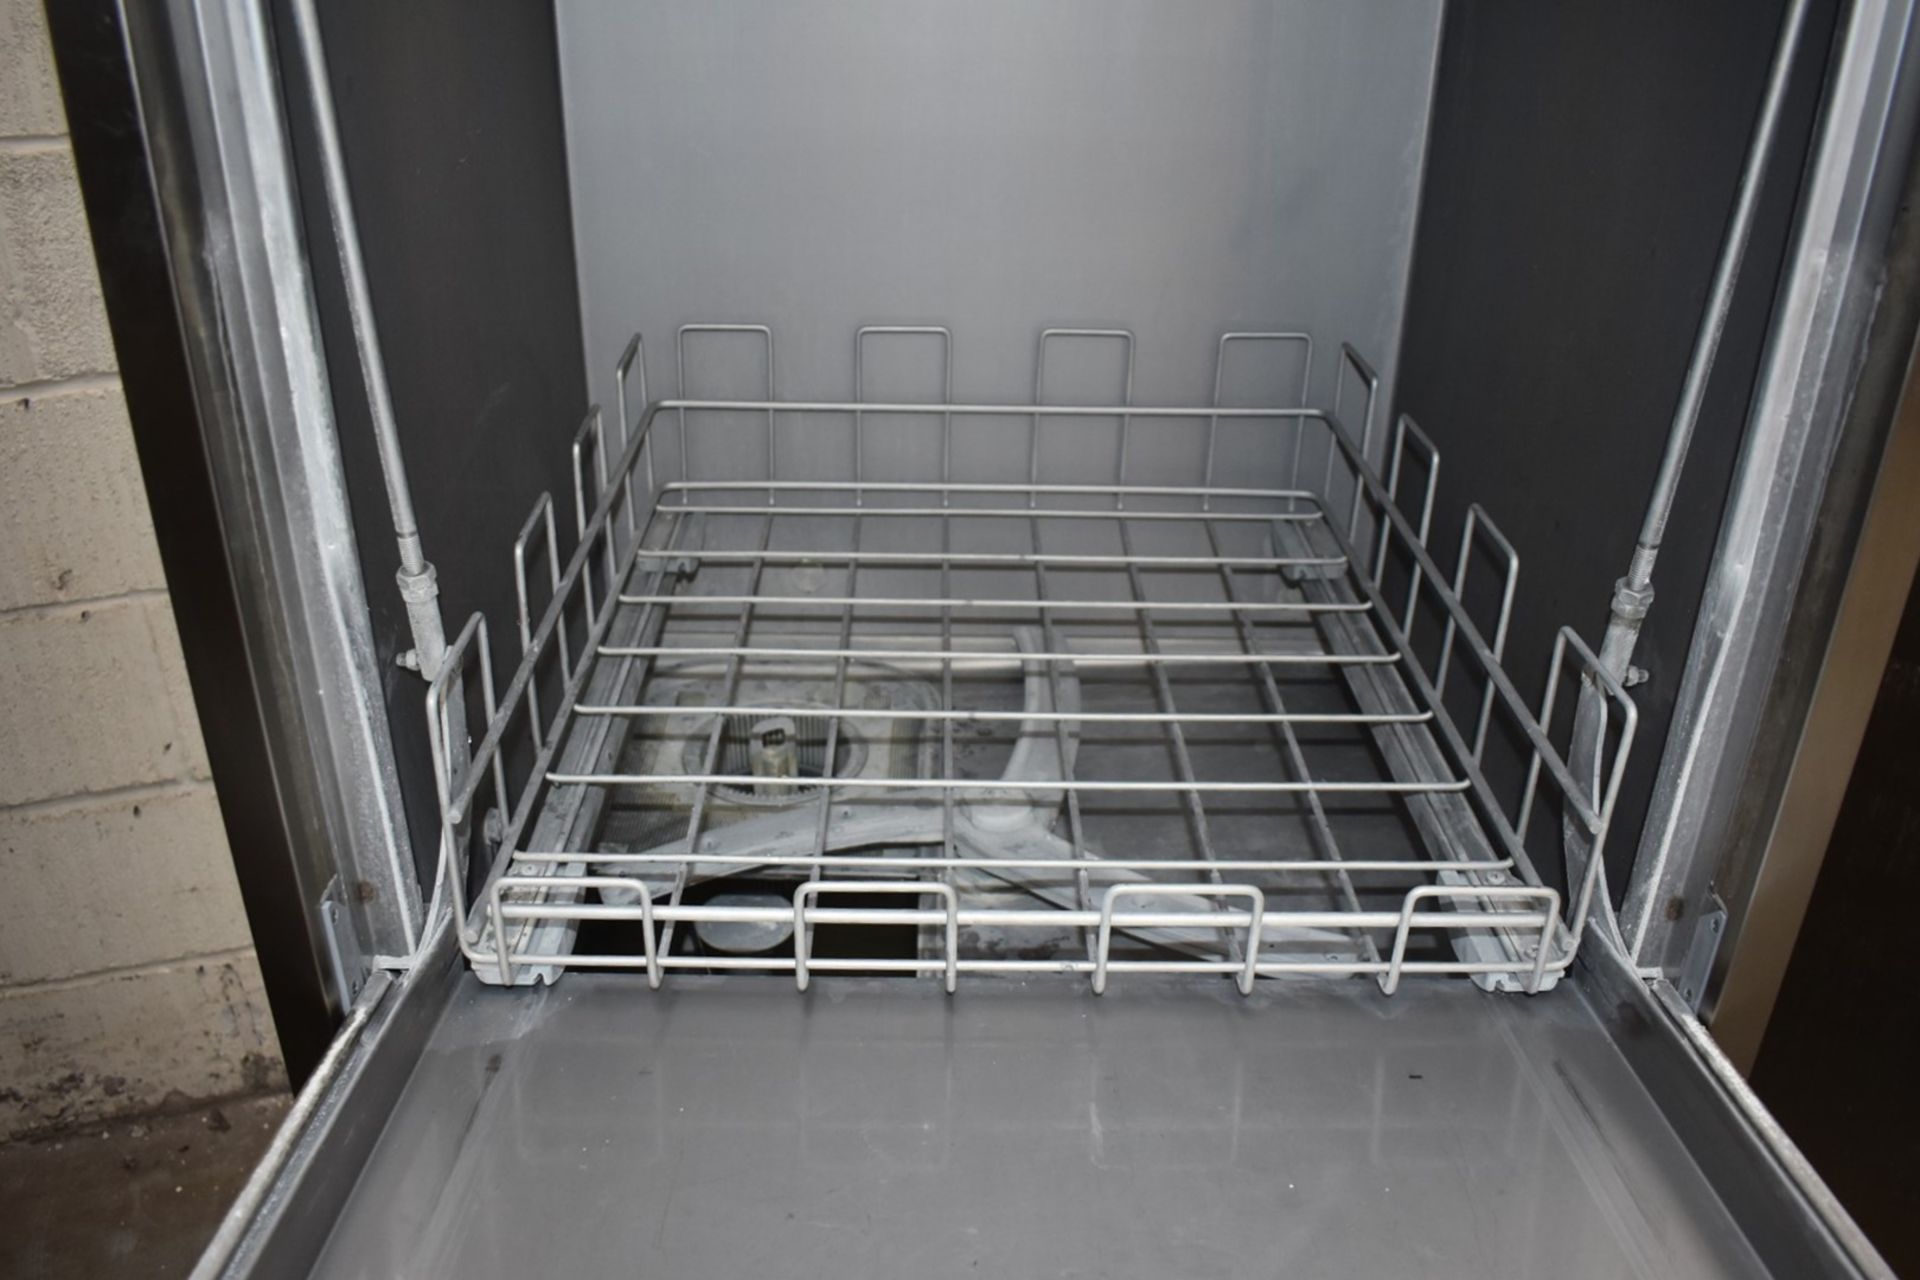 1 x Maidaid Utensil Pot Washer - Model UT61eHR - 2020 Model - 3 Phase - Recently Removed From Major - Image 5 of 12